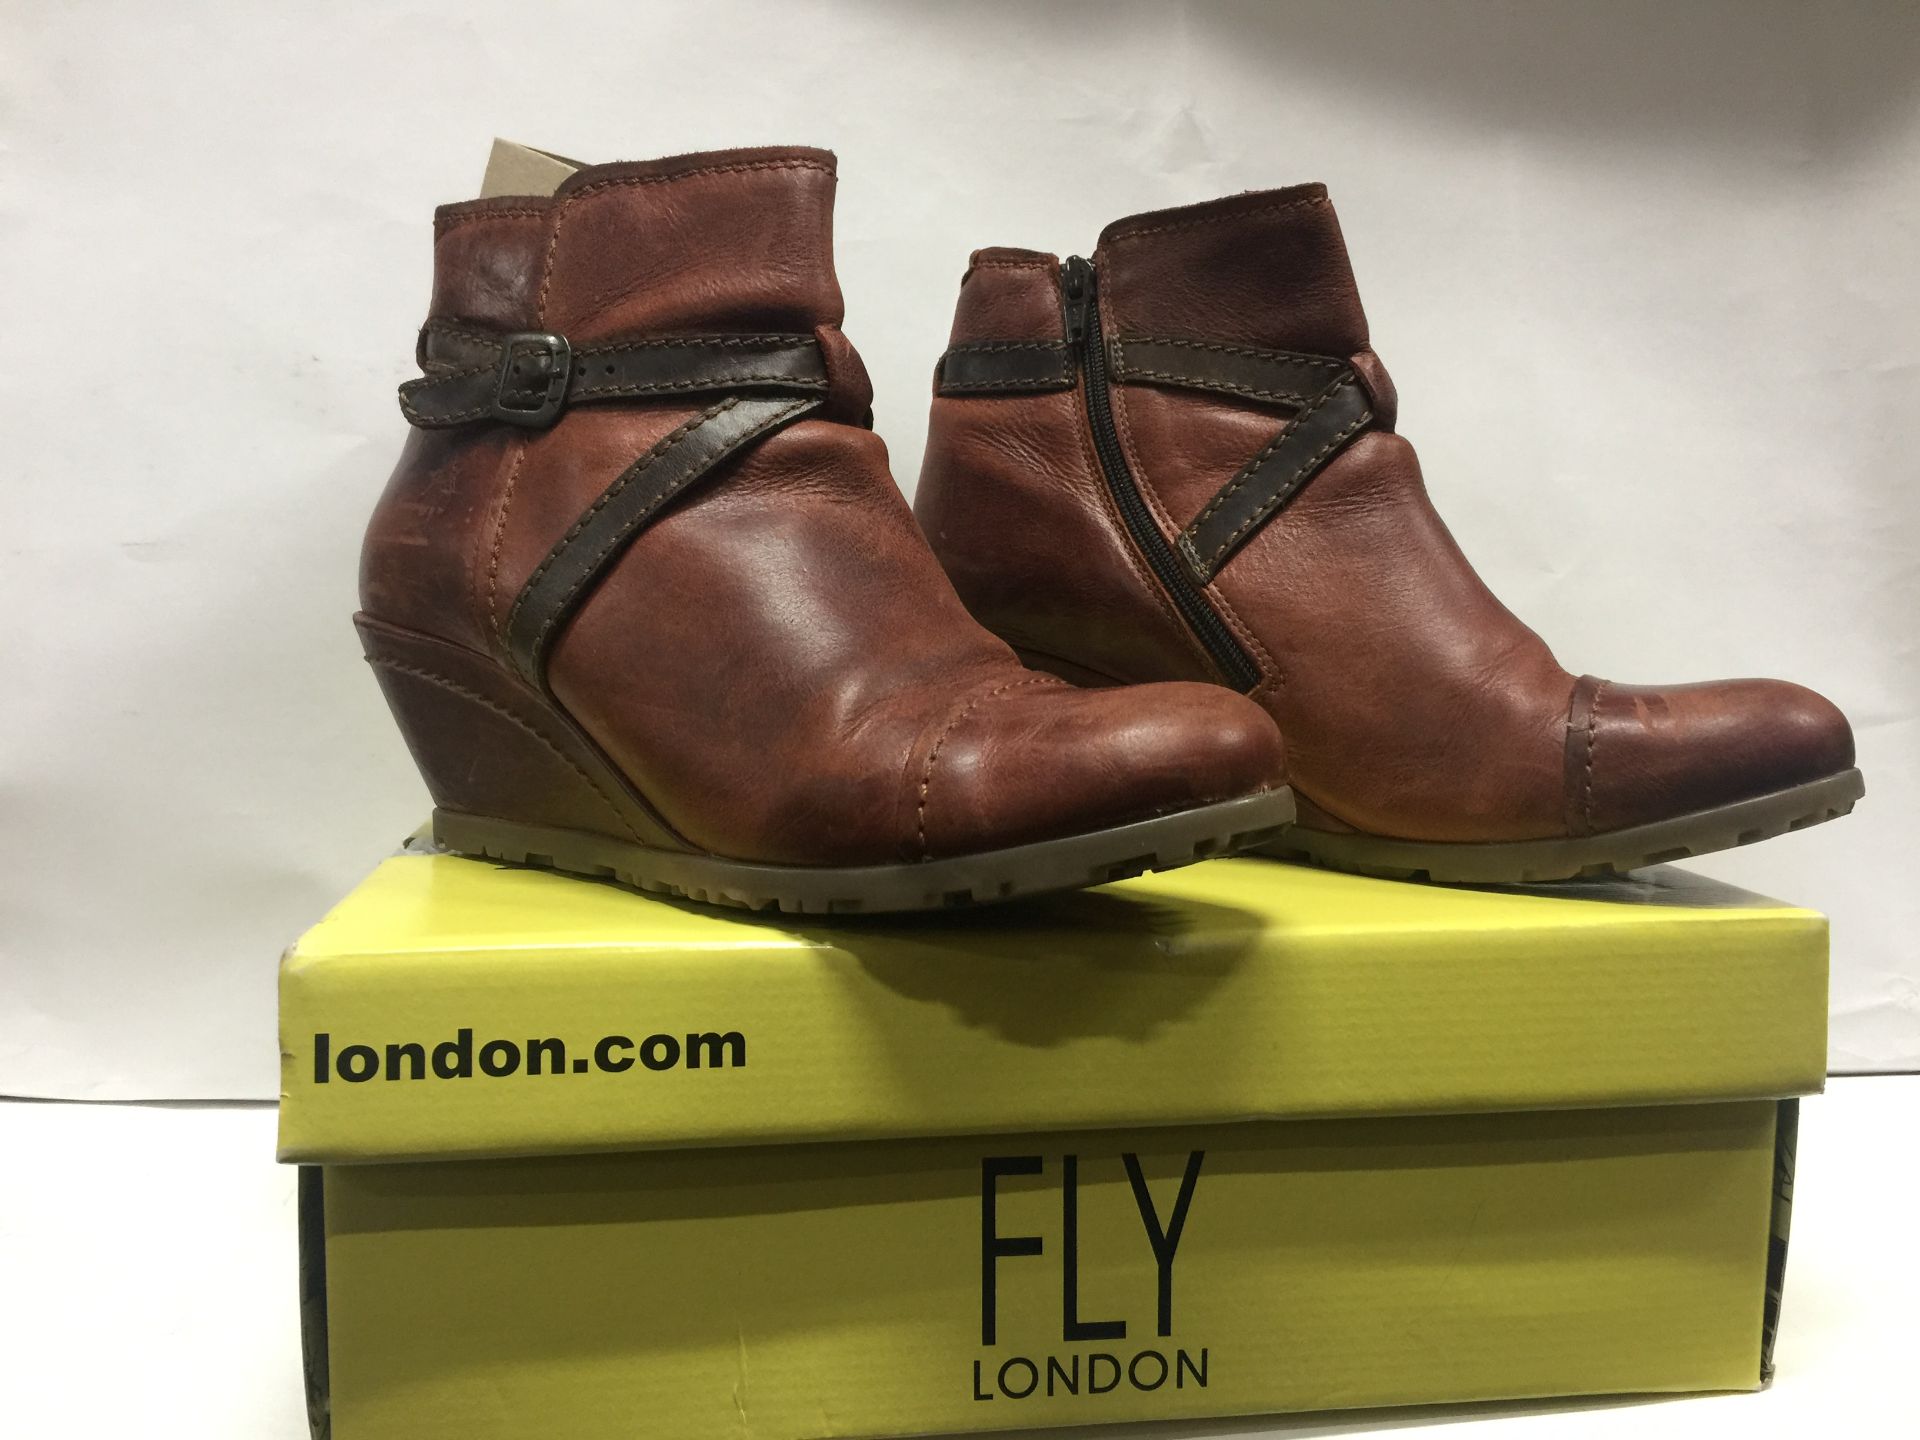 6 x Fly London Women's Boots Mixed Sizes, Styles and Colours Size Ranging EU 38 - EU 42 - Customer R - Image 3 of 5